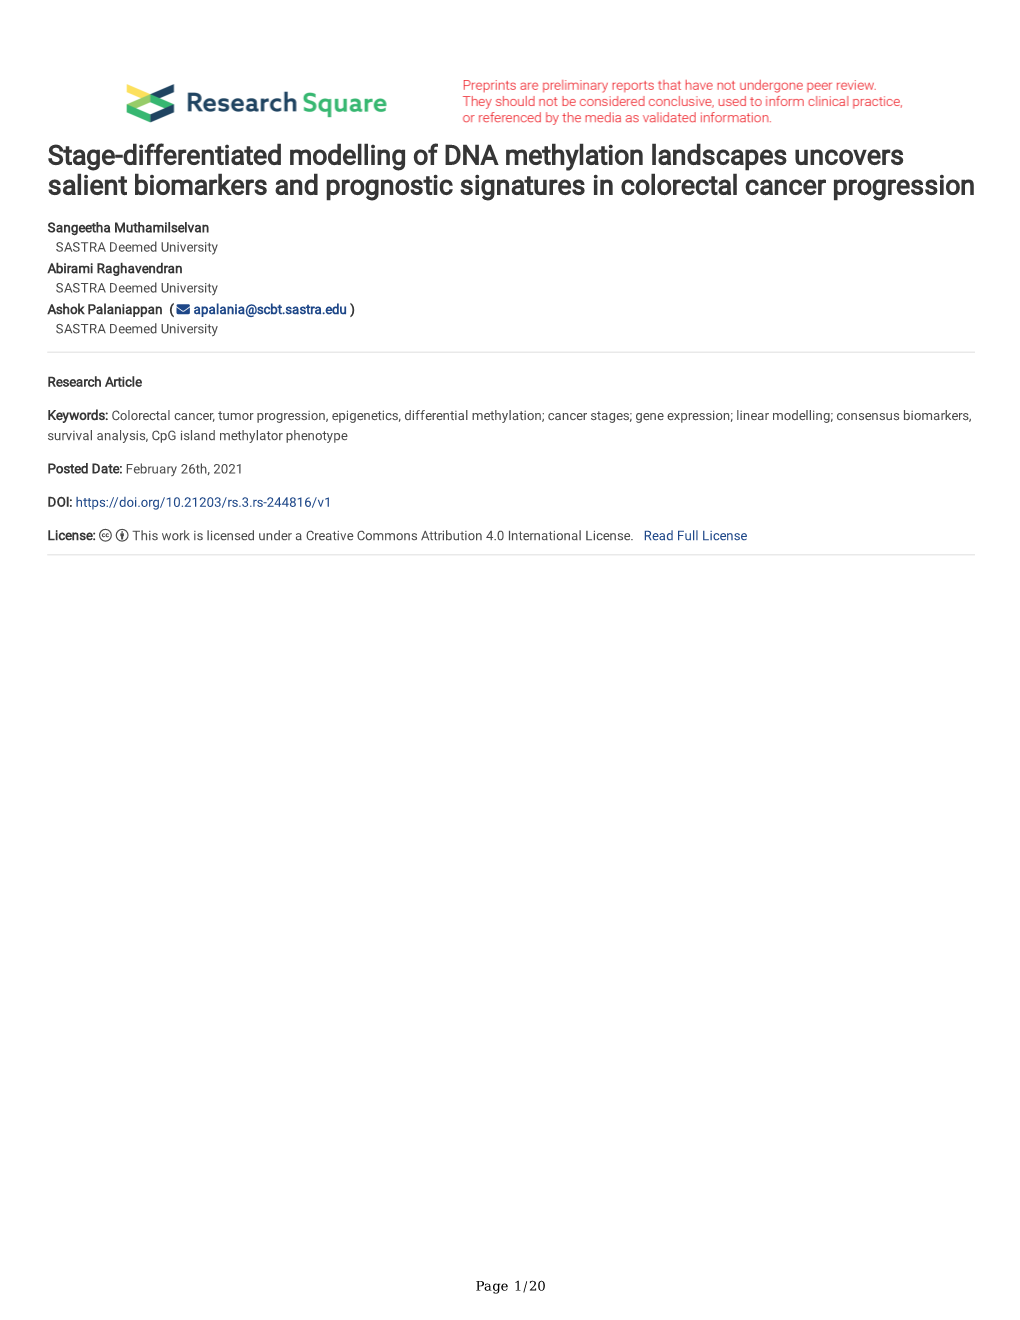 Stage-Differentiated Modelling of DNA Methylation Landscapes Uncovers Salient Biomarkers and Prognostic Signatures in Colorectal Cancer Progression